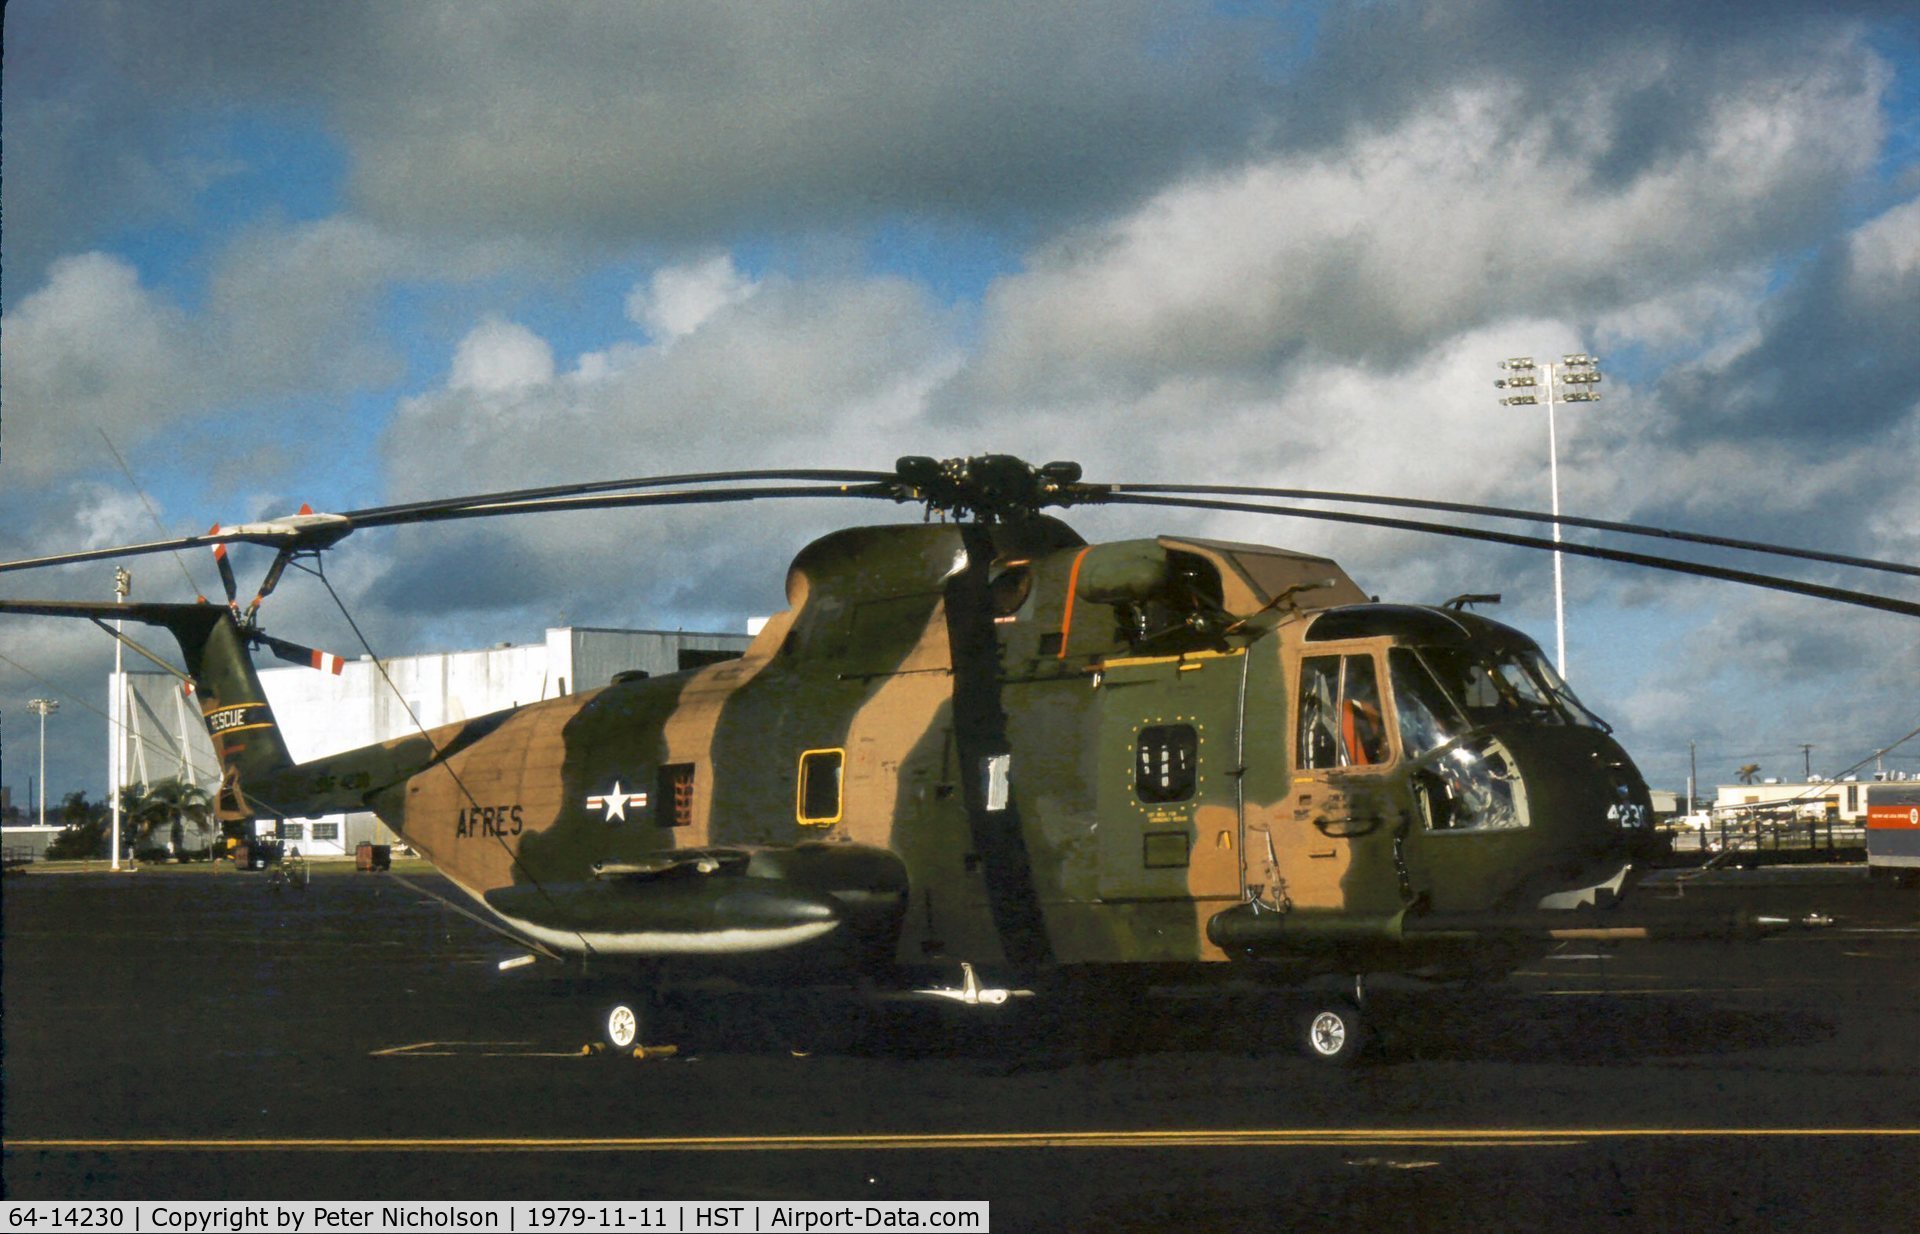 64-14230, 1964 Sikorsky HH-3E Jolly Green Giant C/N 61-533, HH-3E, believed assigned to the 38th Aerospace Rescue & Recovery Squadron at the 1979 Homestead AFB Open House.